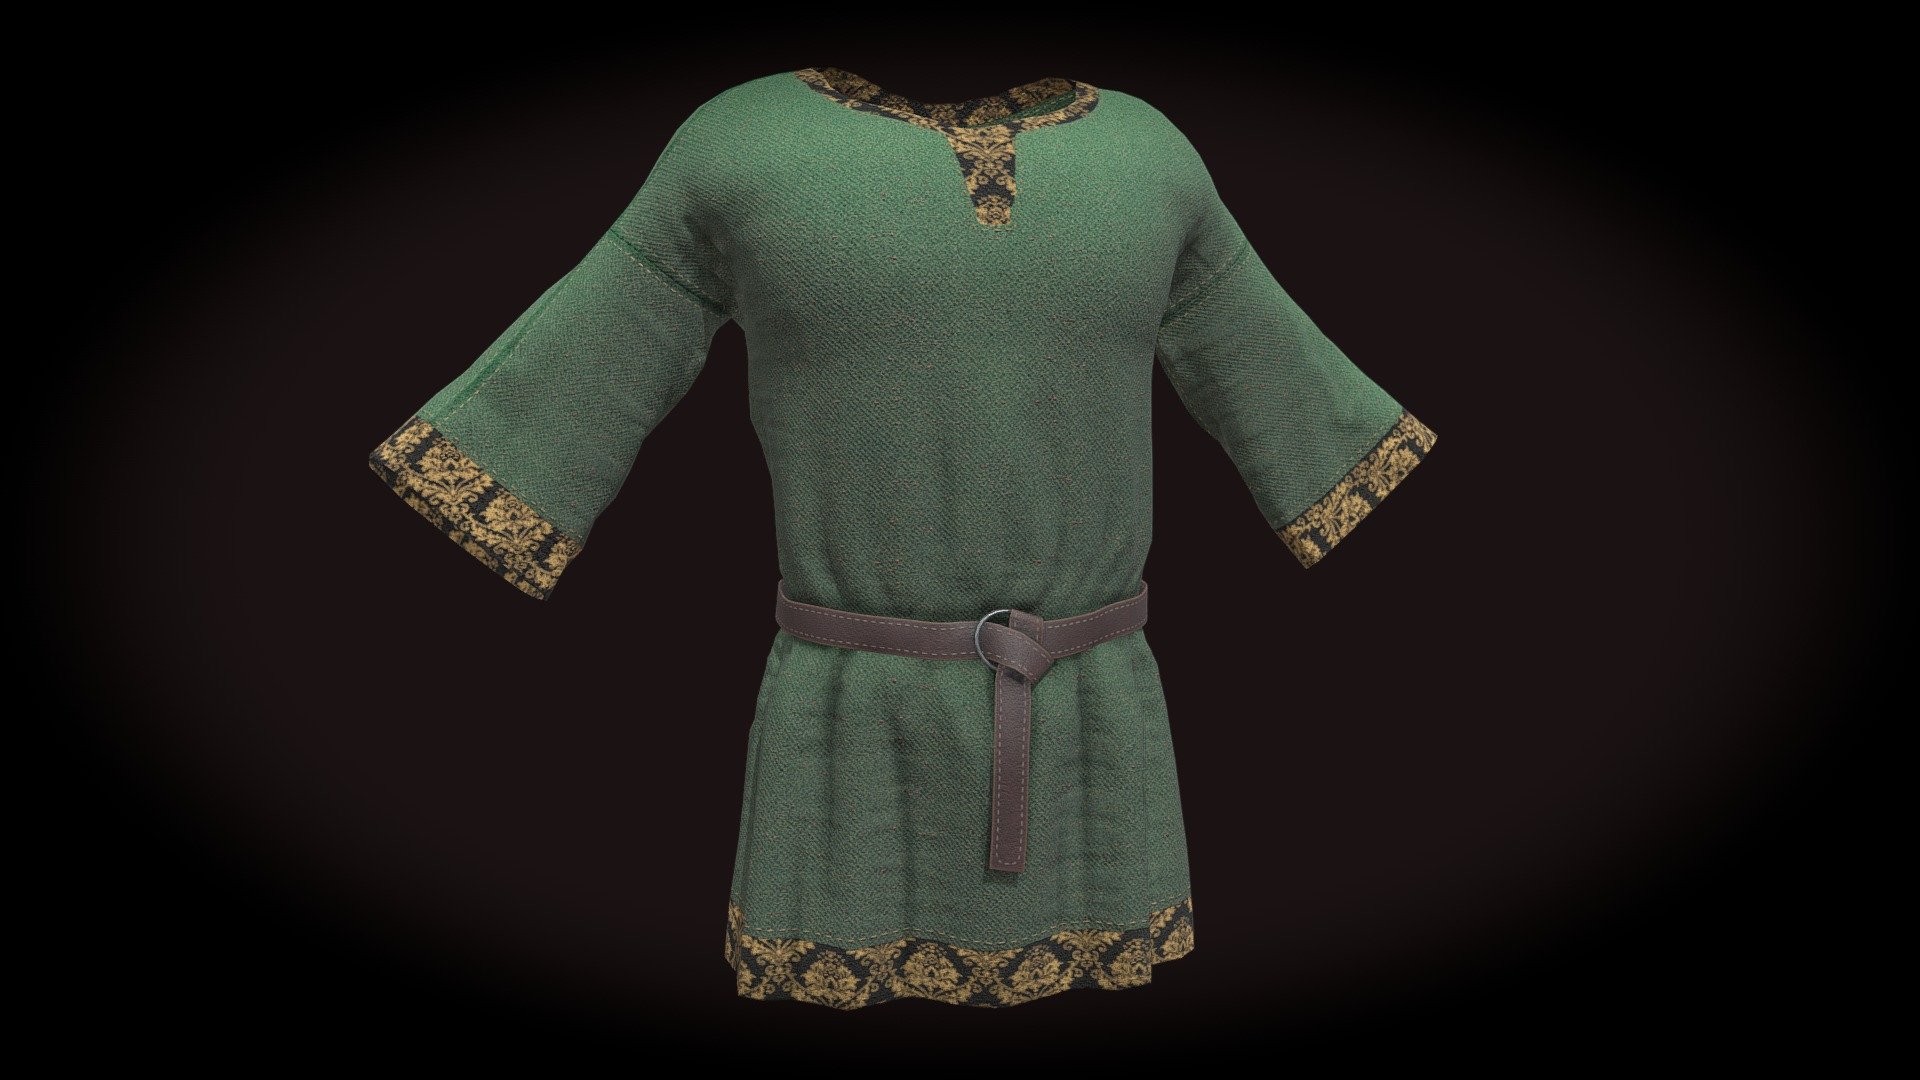 Tunic was reated in Blender with simply cloth pro 
Belt was also created in Blender
4k materials 
Low Poly Count
Model is very easy to weight paint 3d model